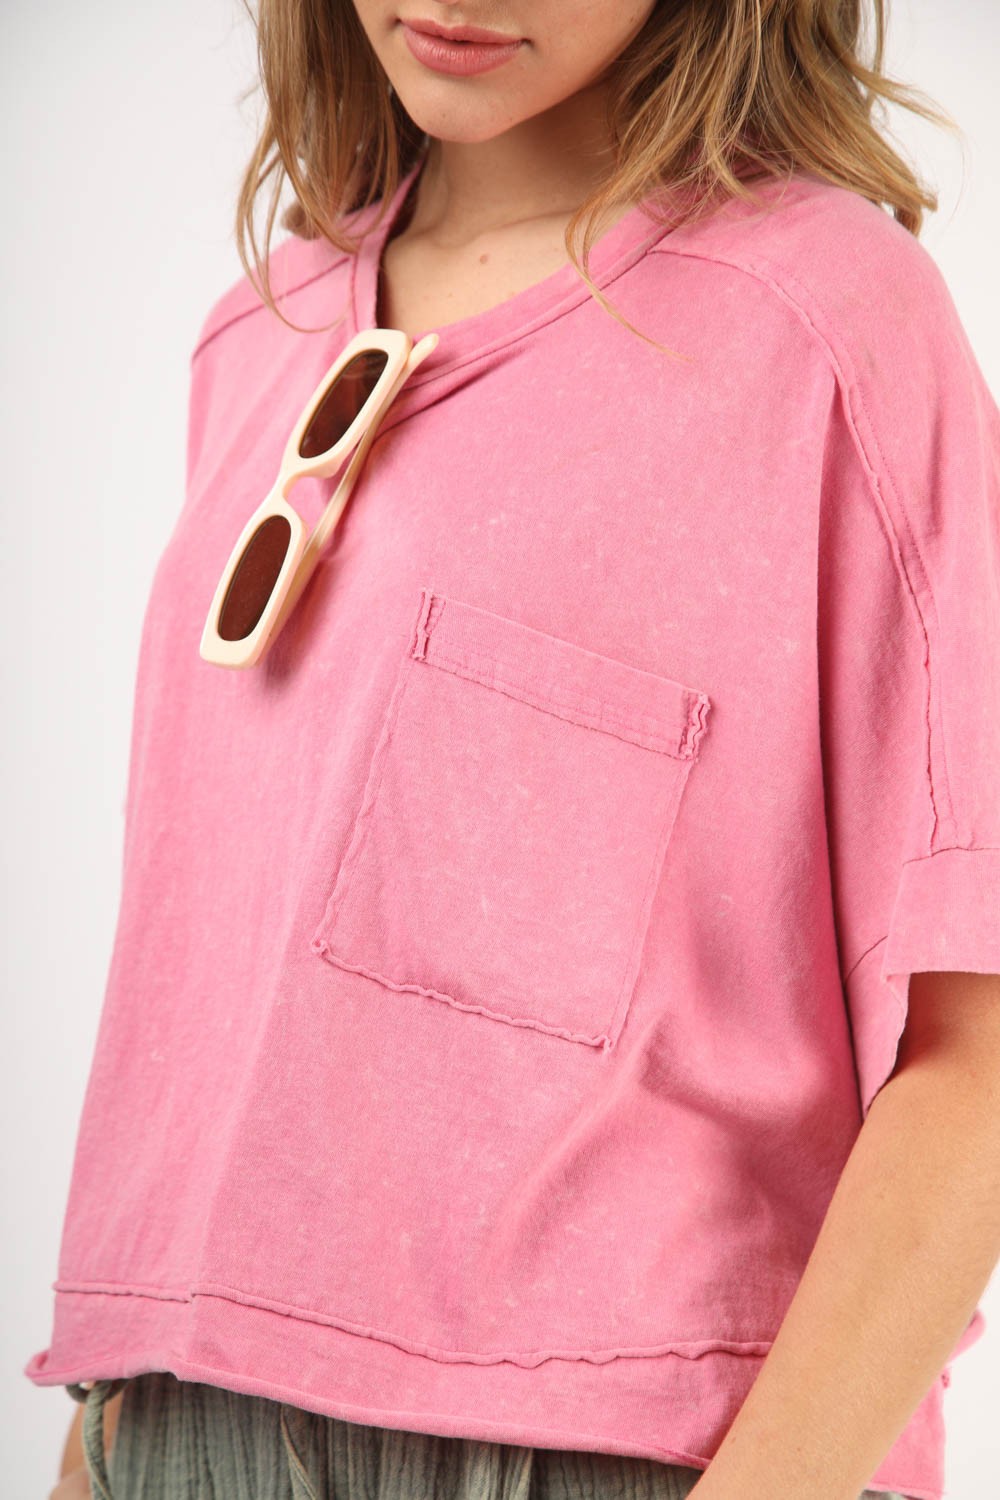 All Fun Cropped Tee - Cotton Candy